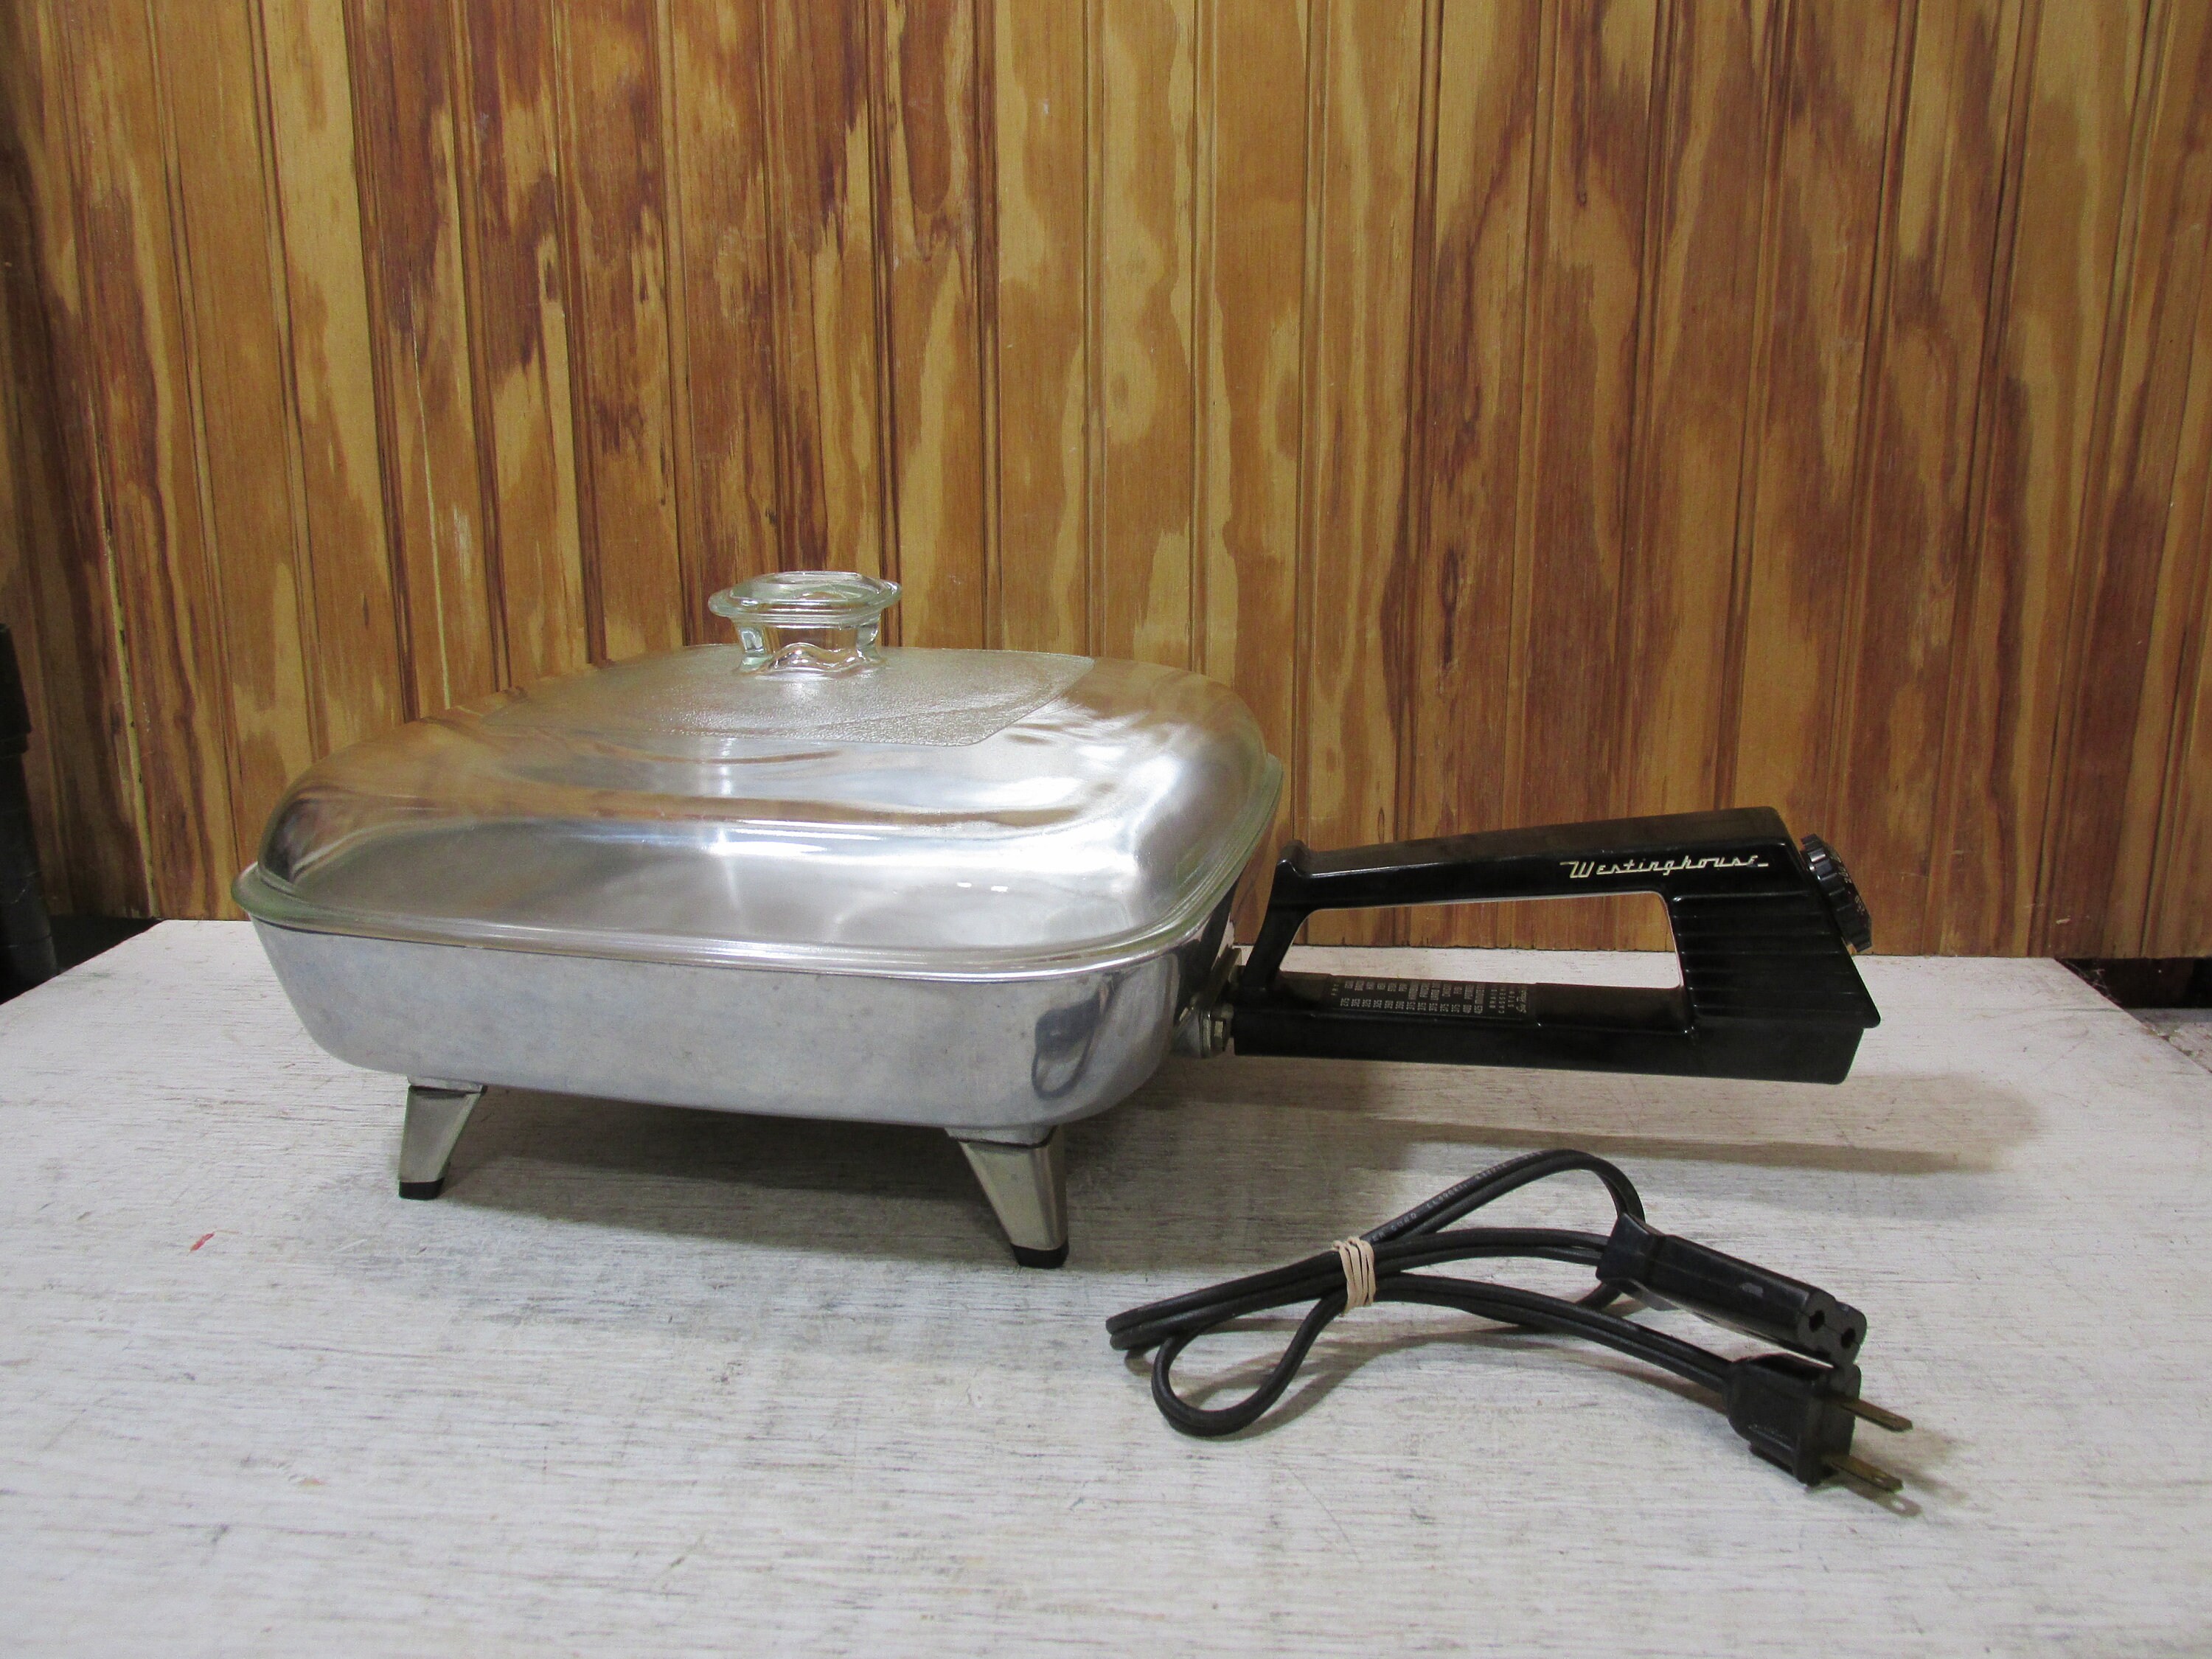 Vintage Sunbeam Aluminum Skillet Food Cooker W/ Lid Food Warmer Small  Kitchen Appliance Collectible Retro Cooking Pan 